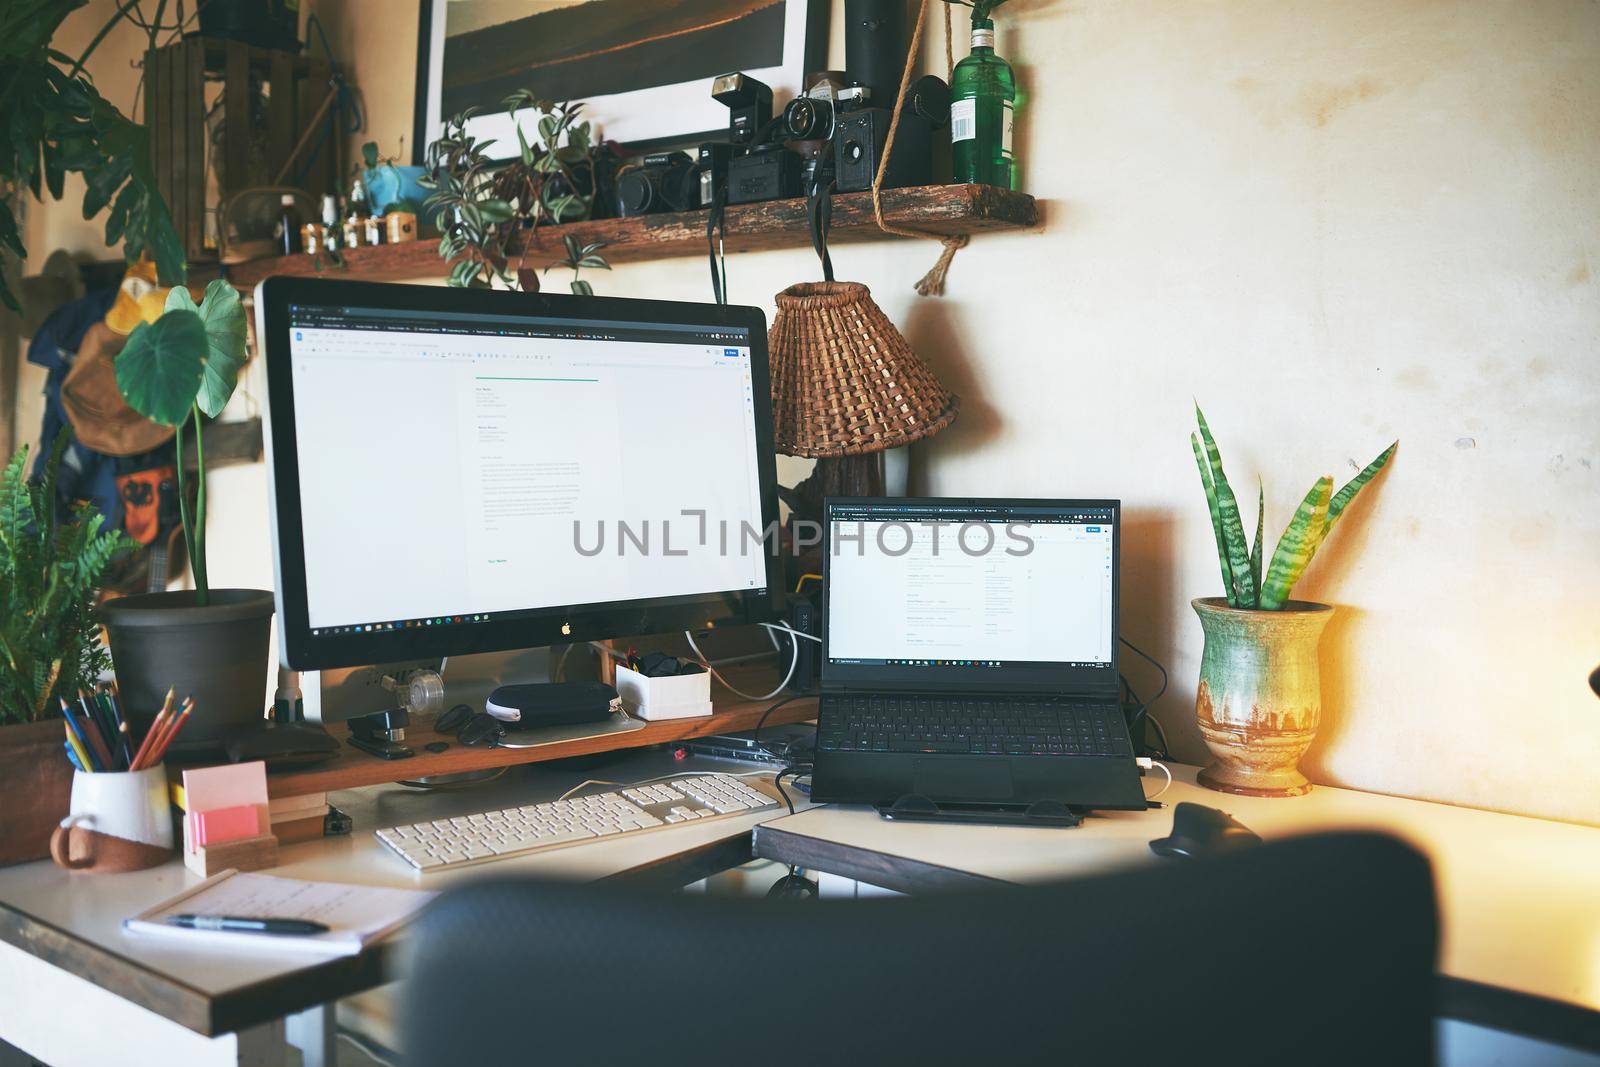 Still life shot of a workstation in a rustic apartment